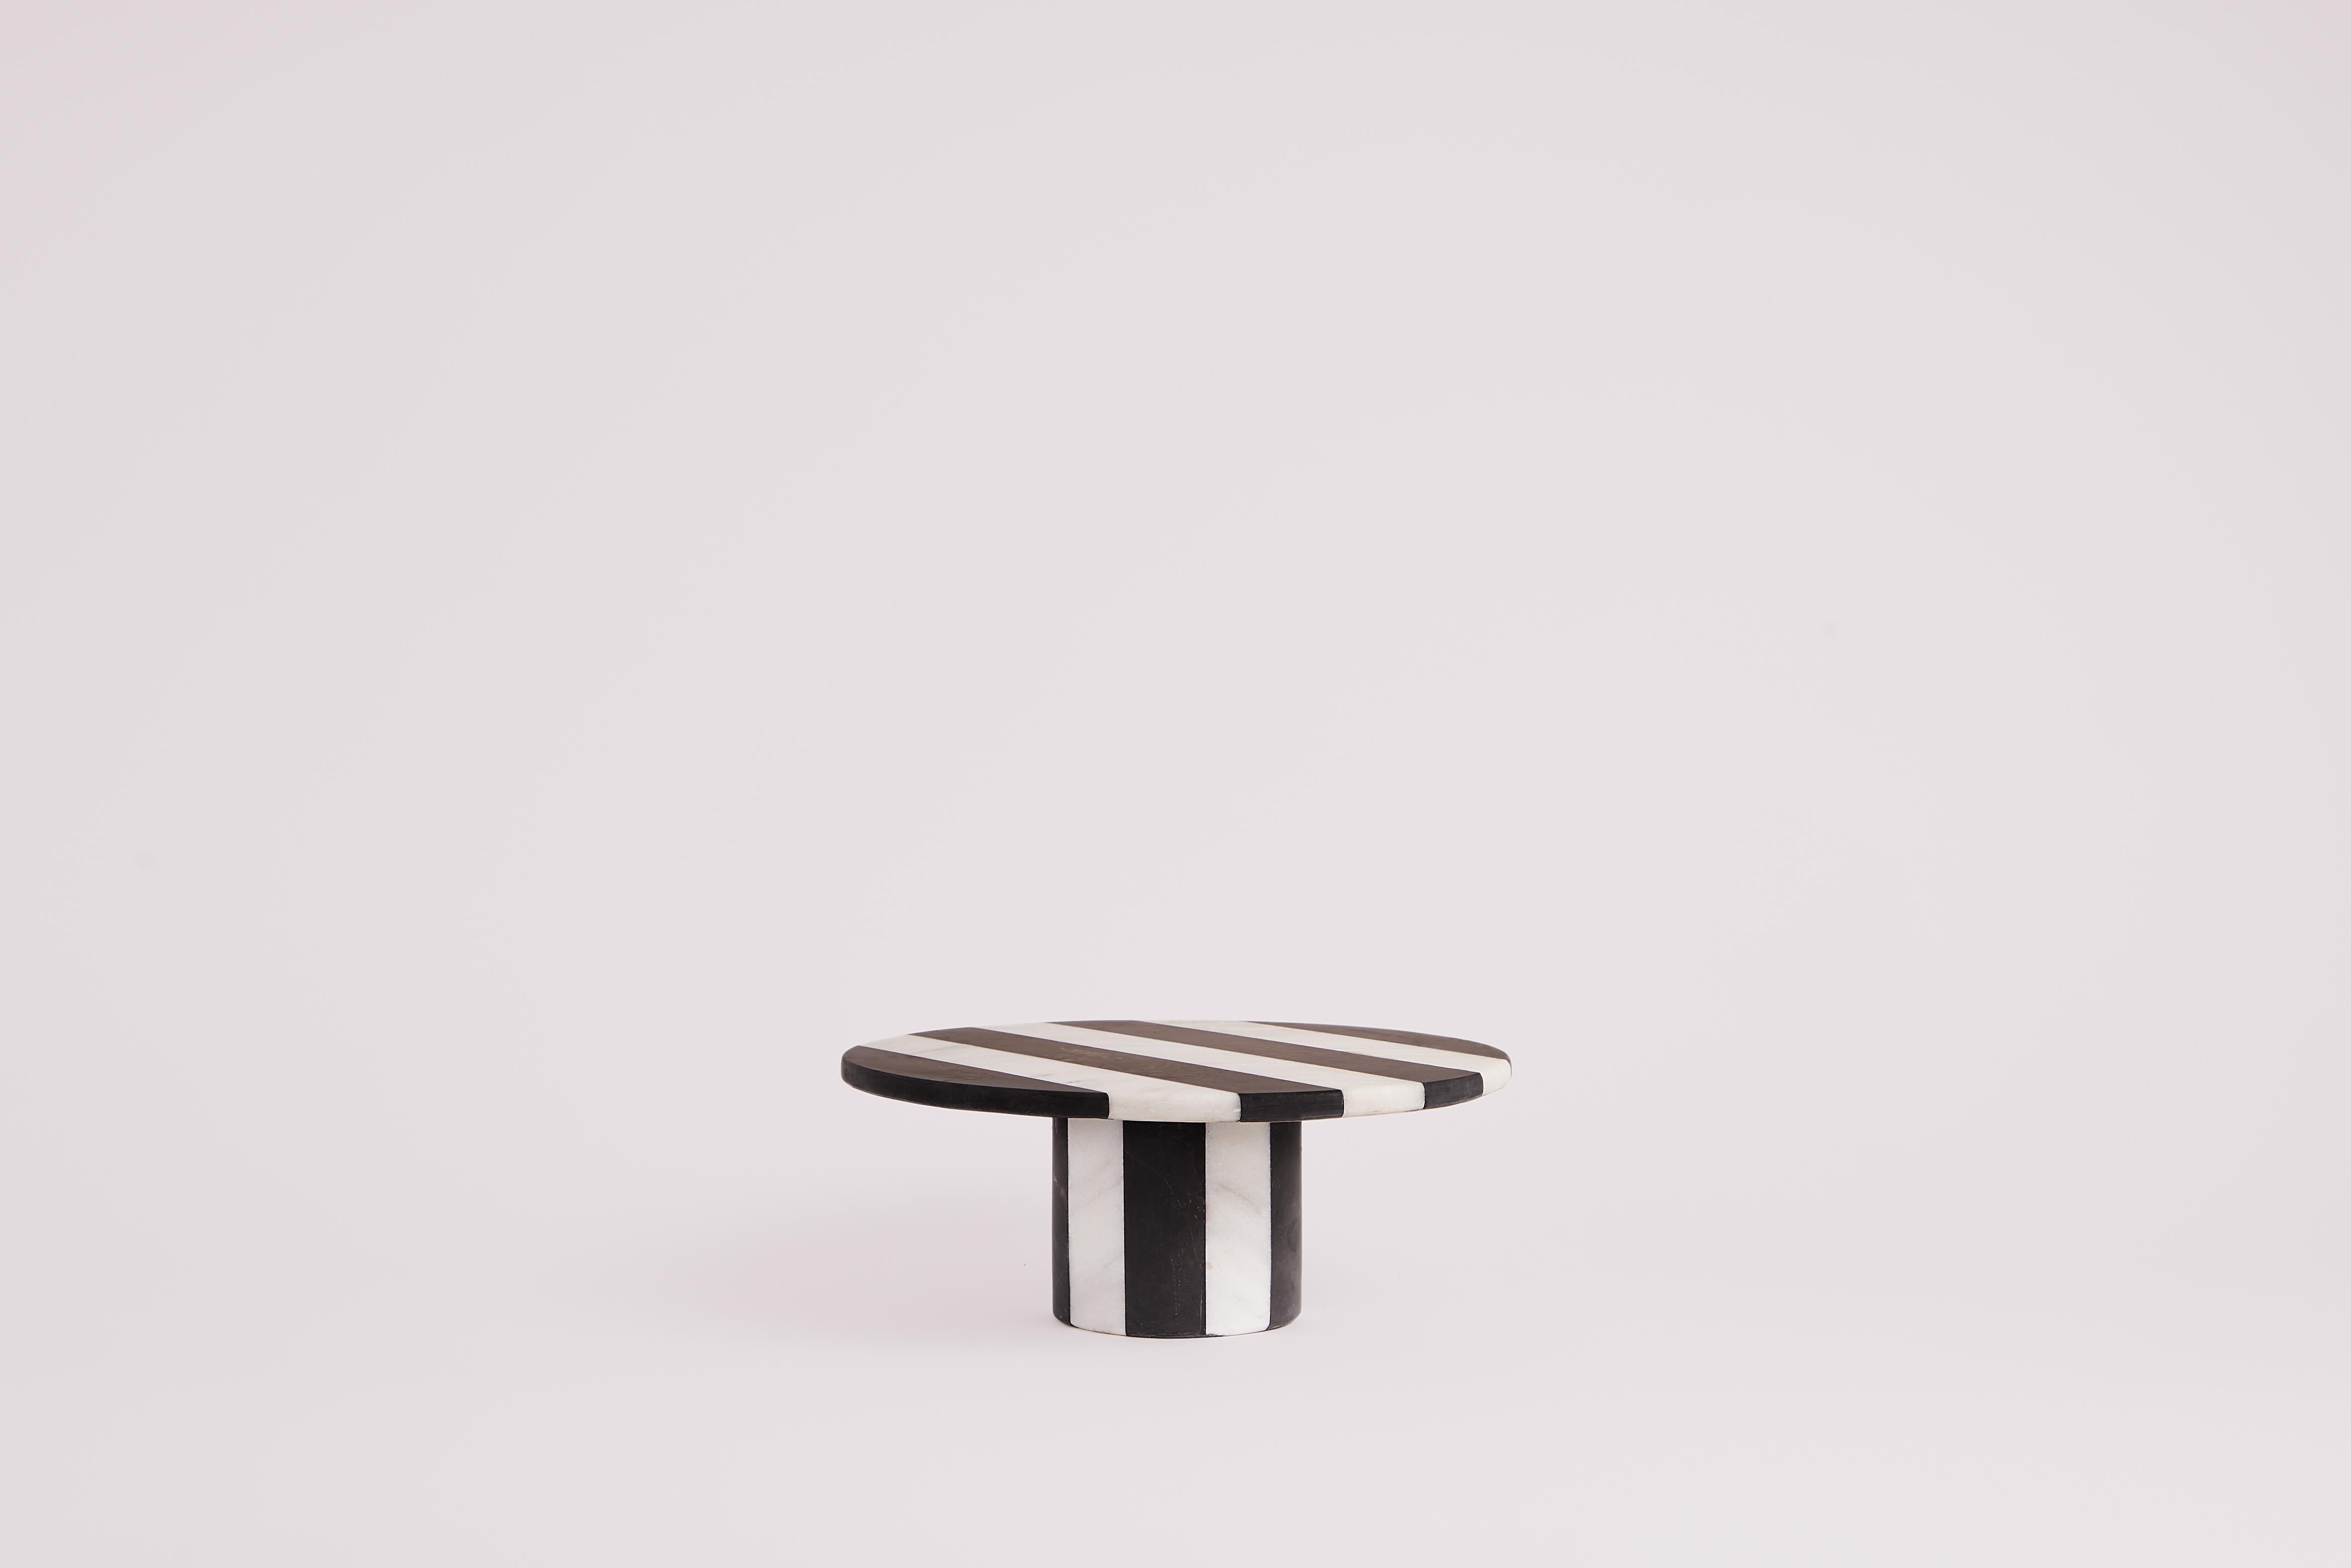 The Rachel black and white marble server, designed by Studio Gaïa is an elegant and functional object that will bring a touch of sophistication to any table or display space. Made from high quality marble, this dish is carefully carved to deliver a